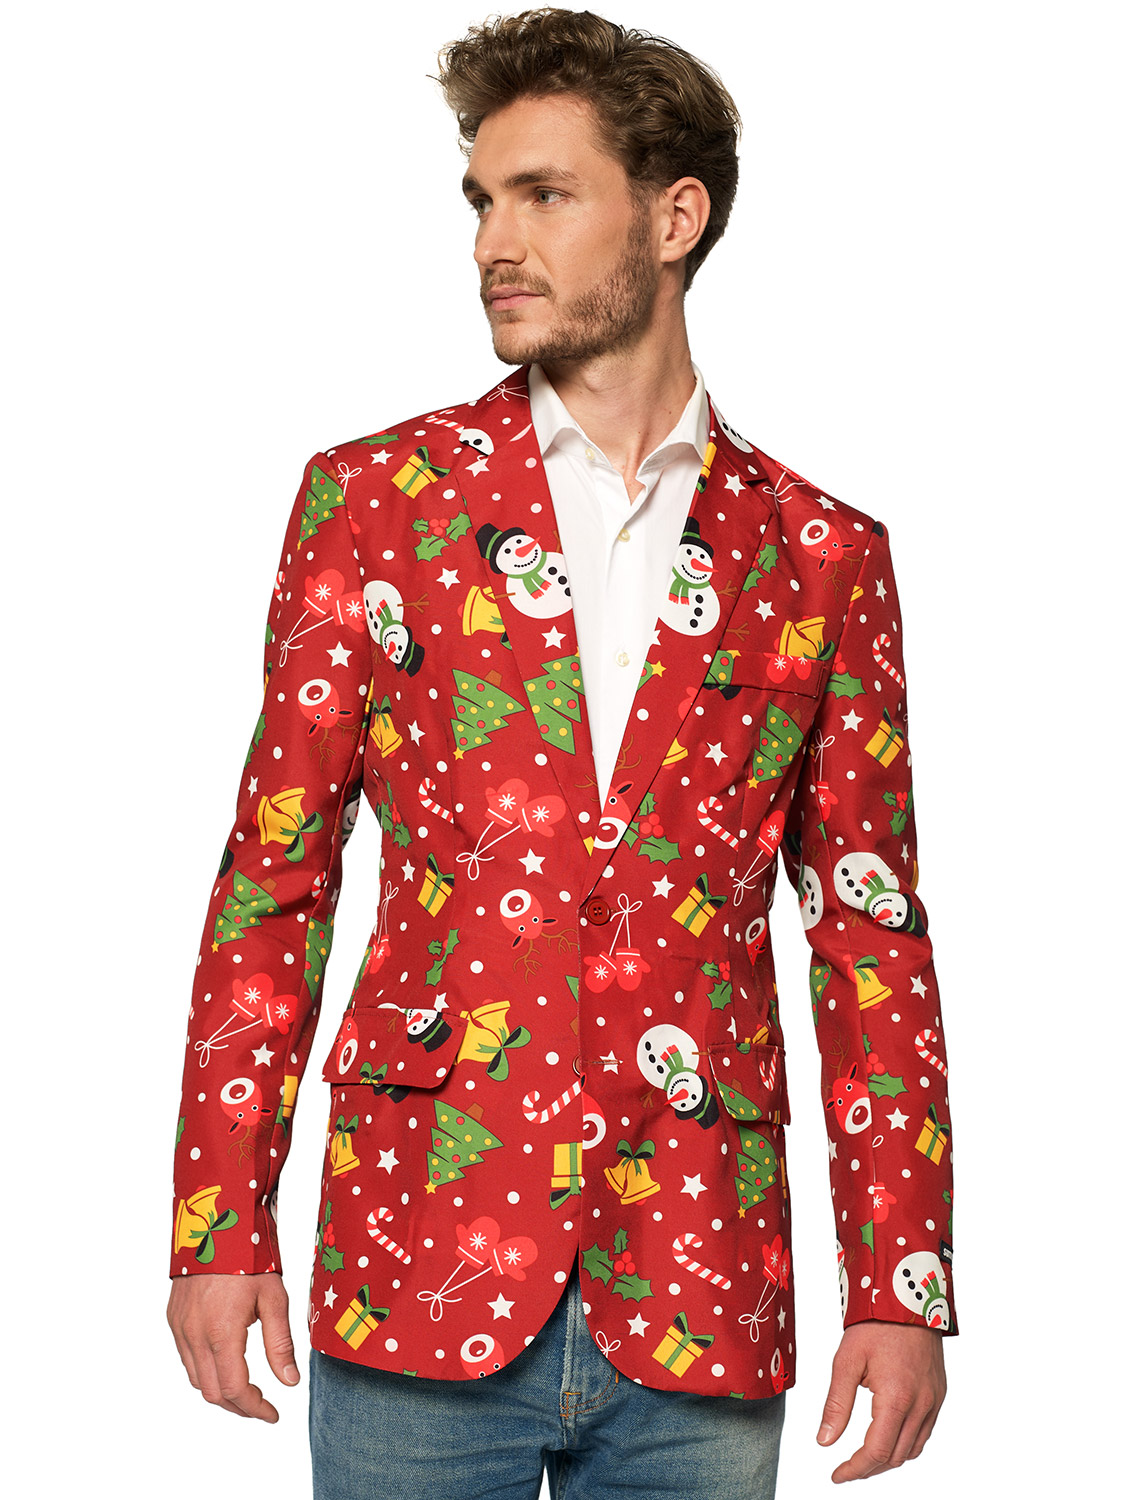 Mens Christmas Light Up Suitmeister Jacket Xmas Party Fun Fancy Dress